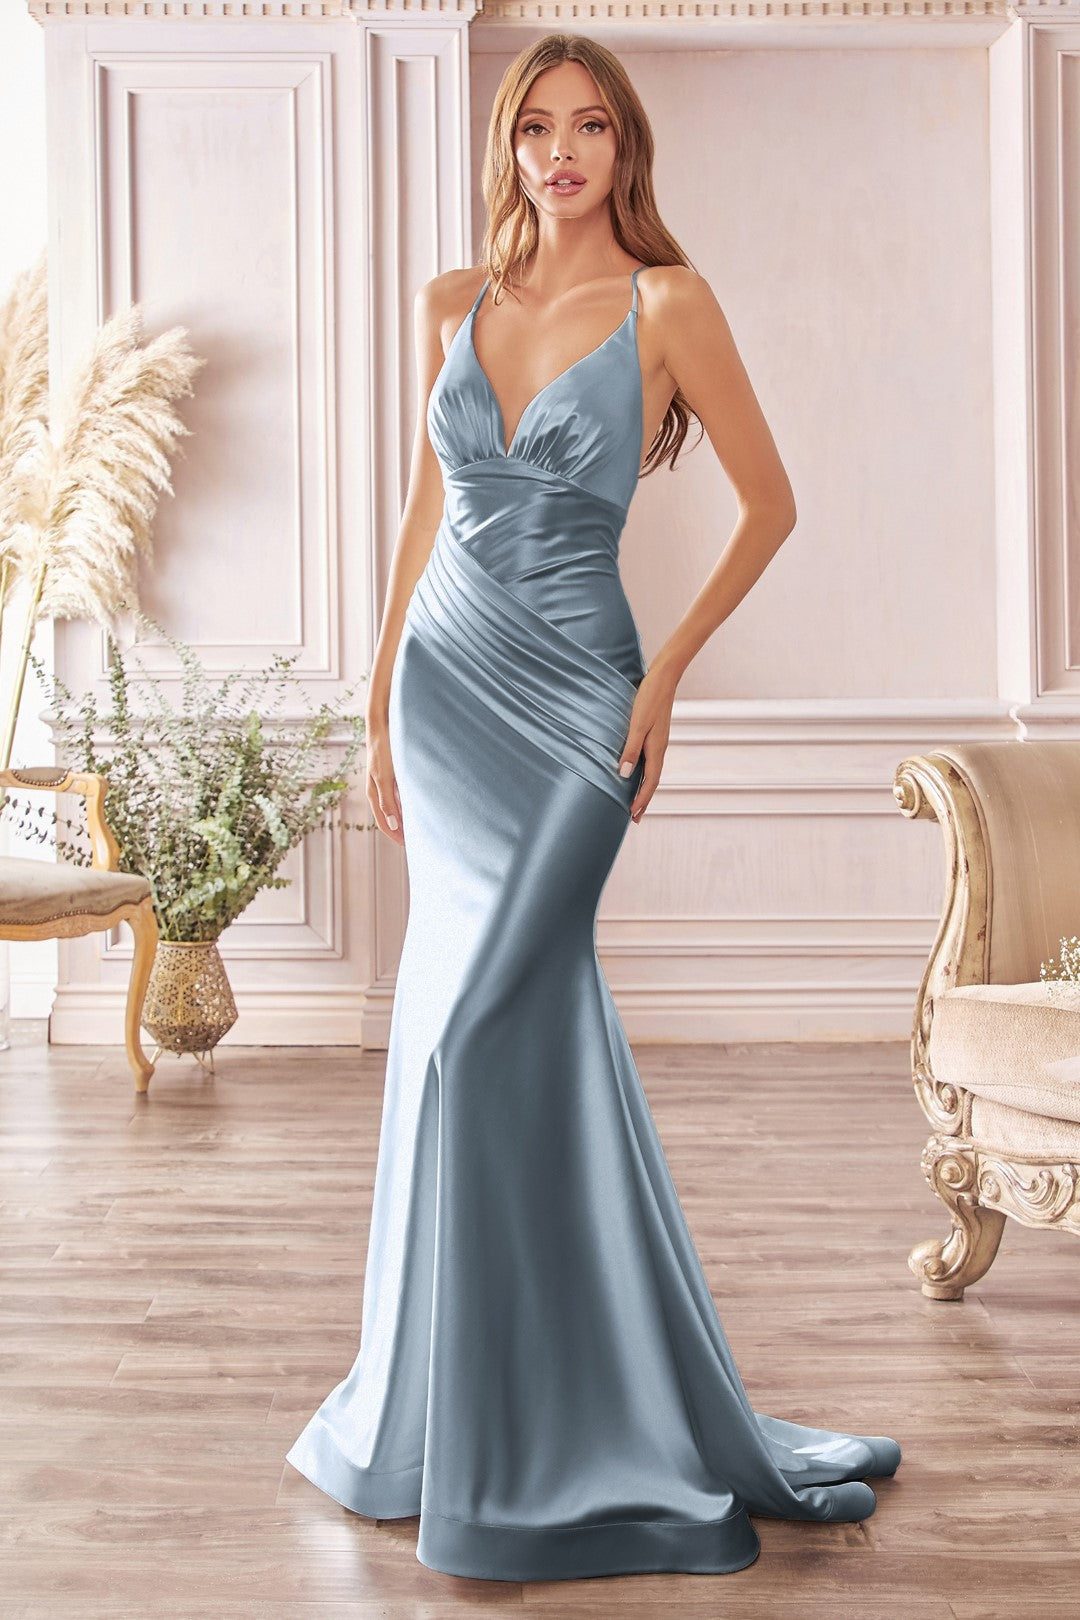 IIF Mermaid Satin Prom Dresses Long with Slit Bridesmaid Dresses V Neck  Strapless Women's Formal Evening Gowns Custom Black IIF050 at Amazon  Women's Clothing store